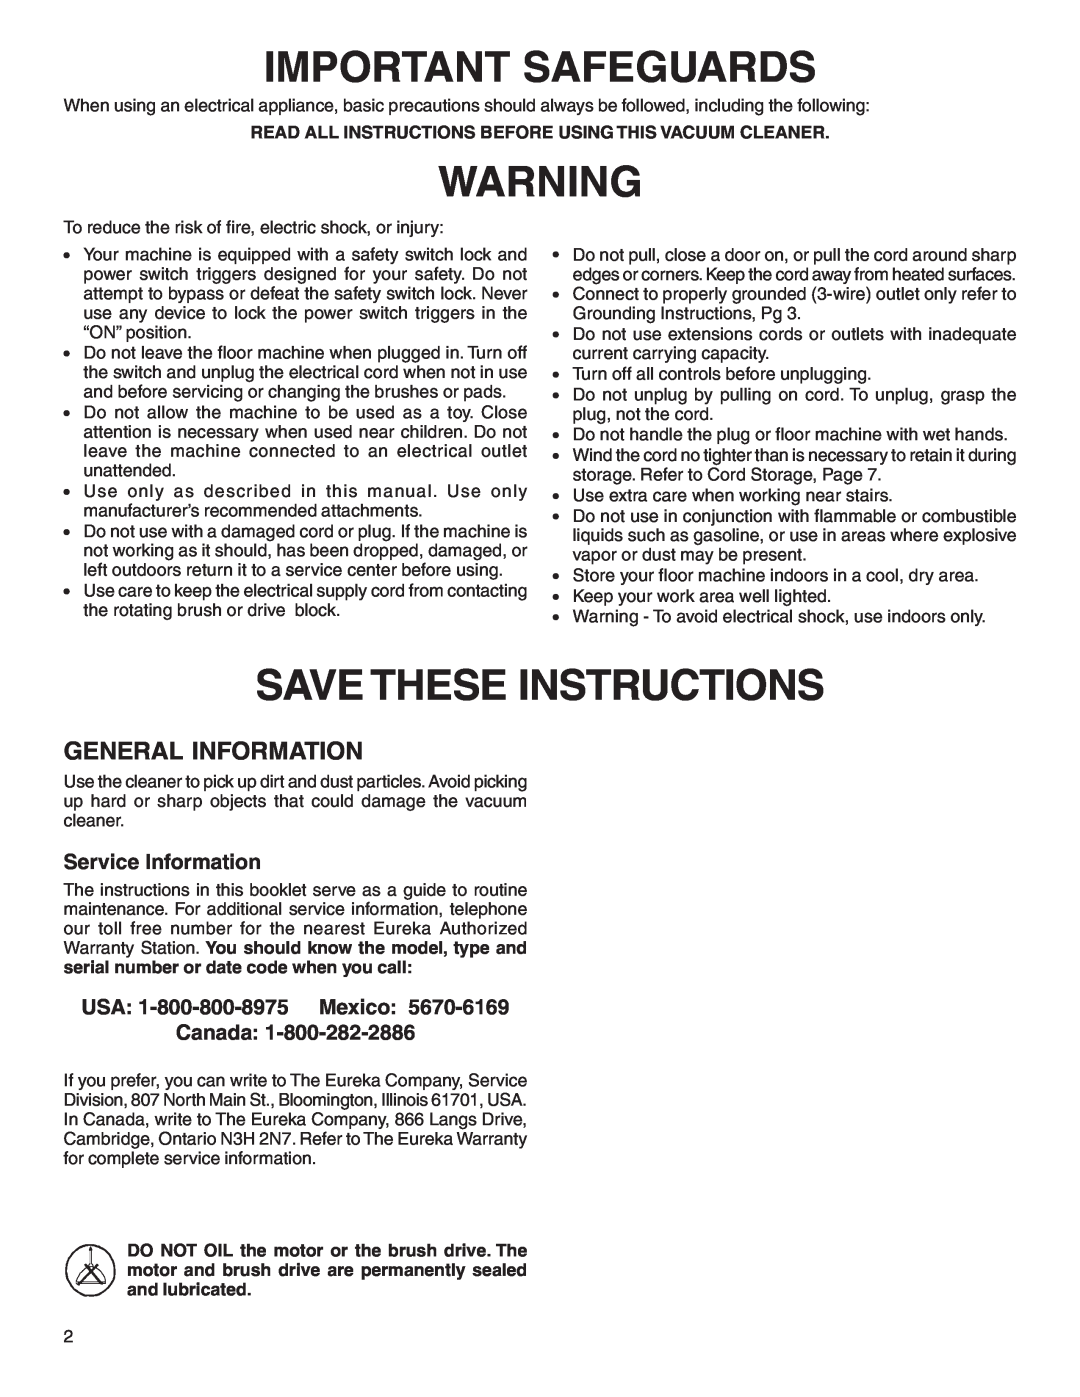 Sanitaire 6000 warranty Important Safeguards, Save These Instructions, General Information, Service Information 